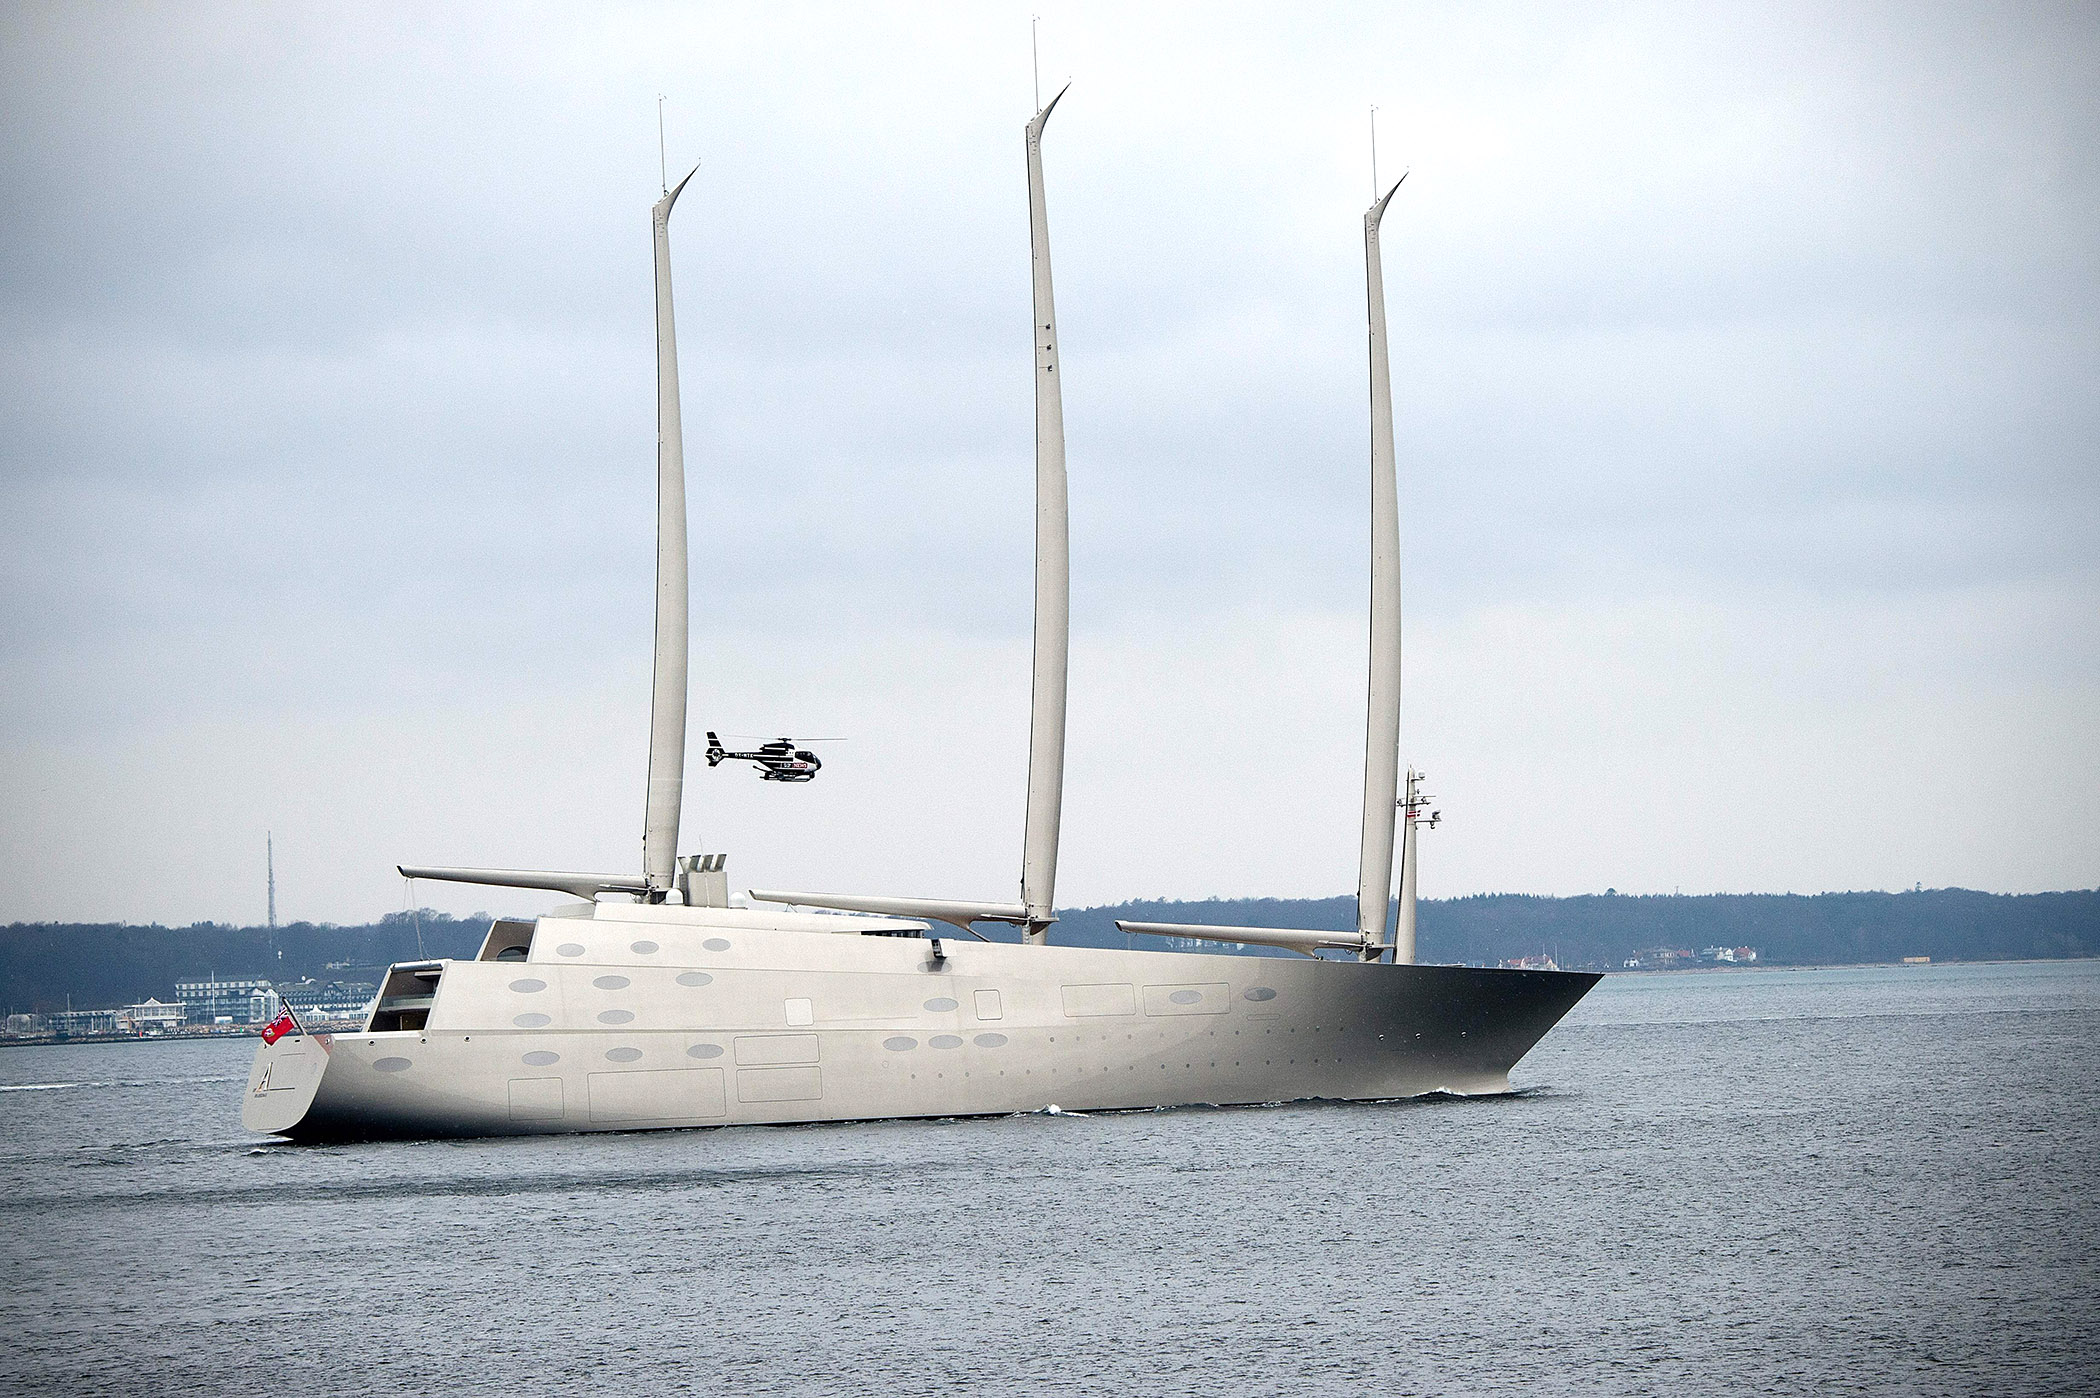 Check Out This Record-Breaking, Futuristic Superyacht As It's Delivered to Its Russian Billionaire Owner